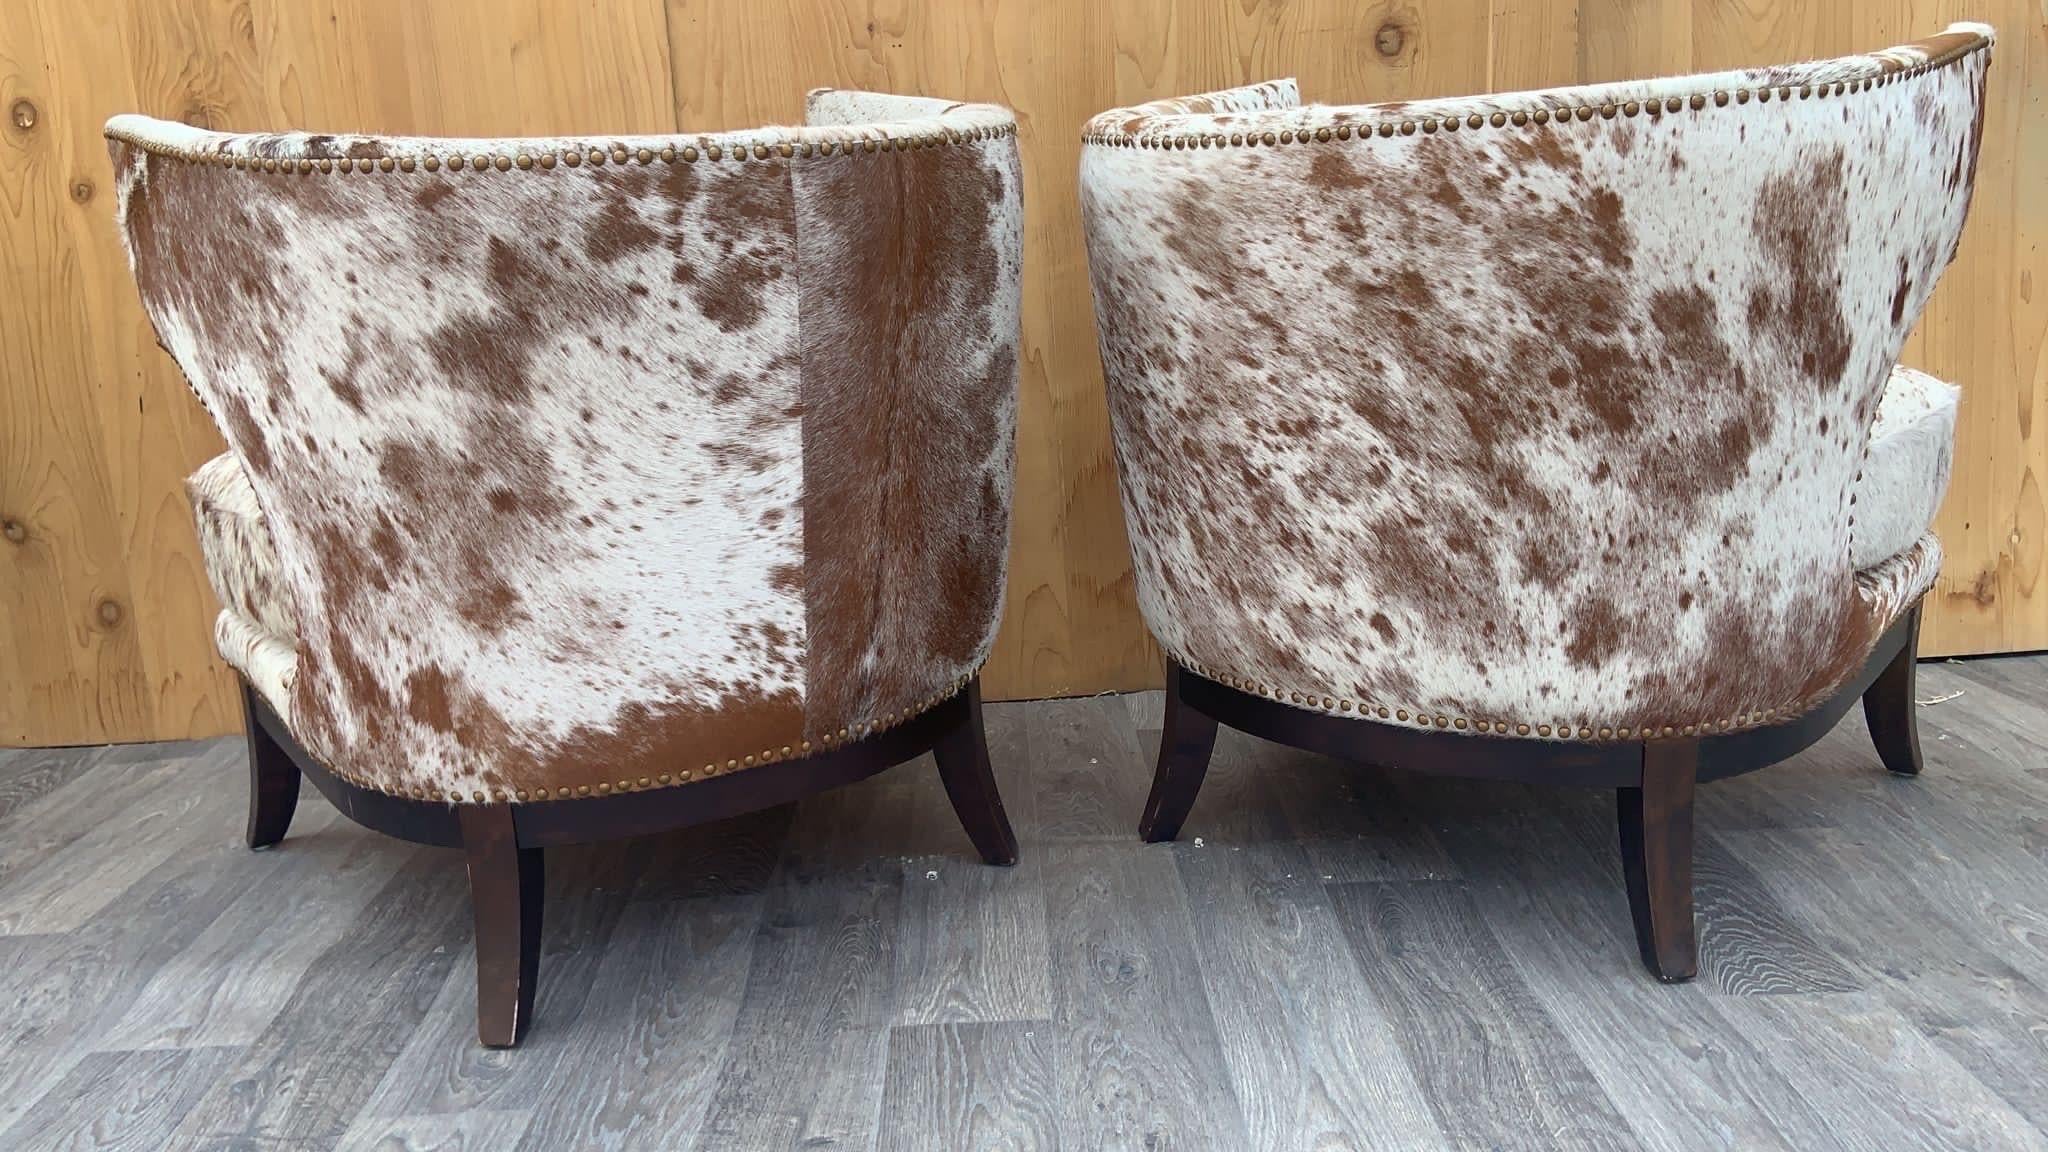 Brass English Horseshoe Savoy Chairs Newly Upholstered in Brazilian Cowhide - Set of 2